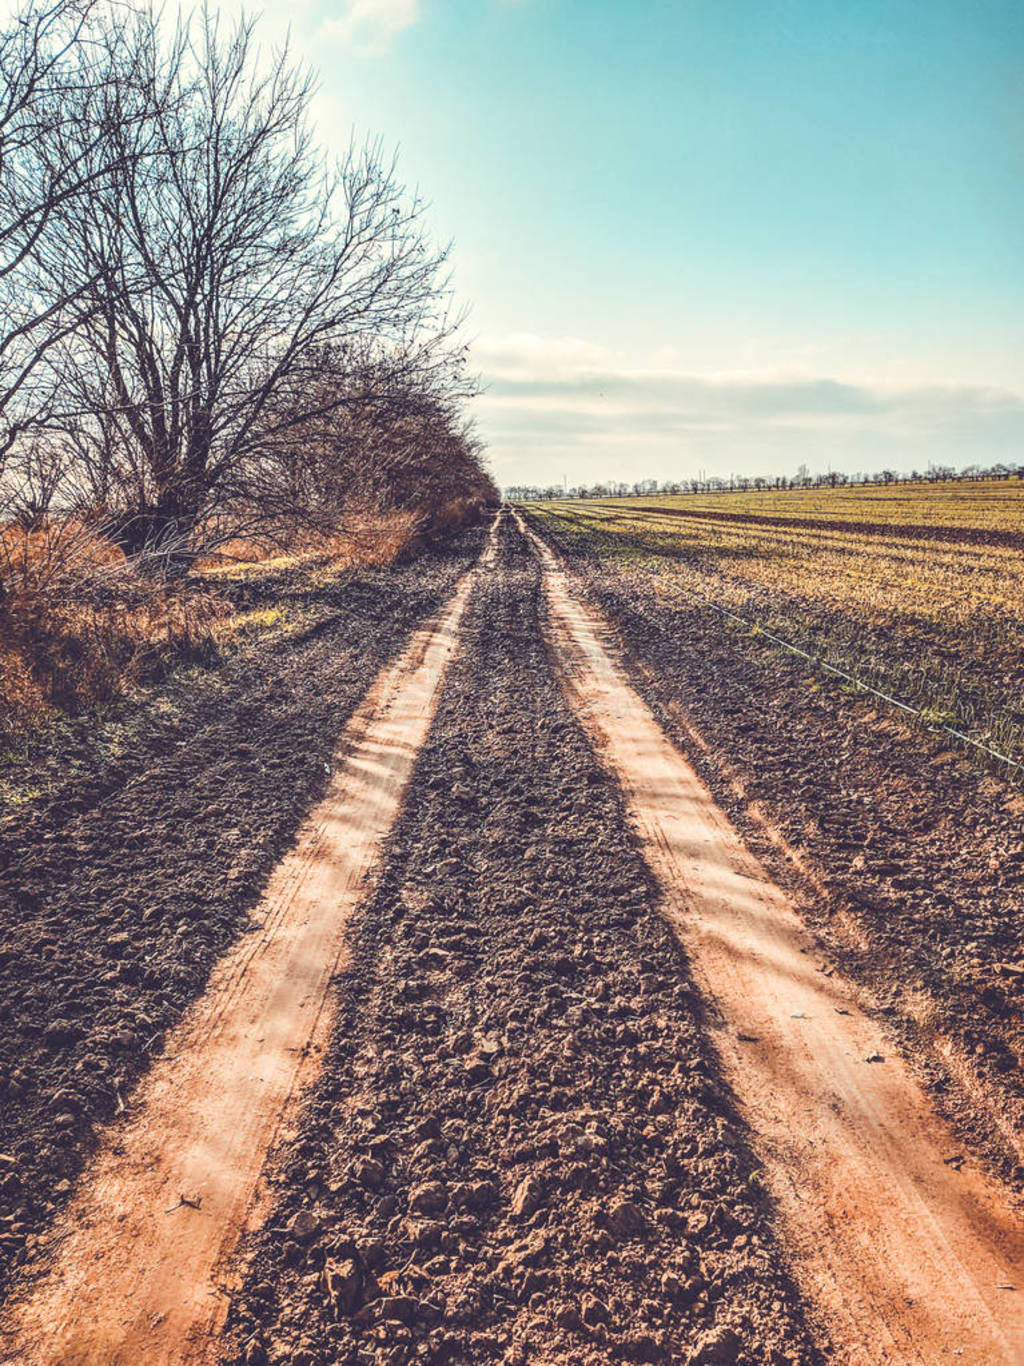 Empty gravel dirt road through countryside landscape and grass f